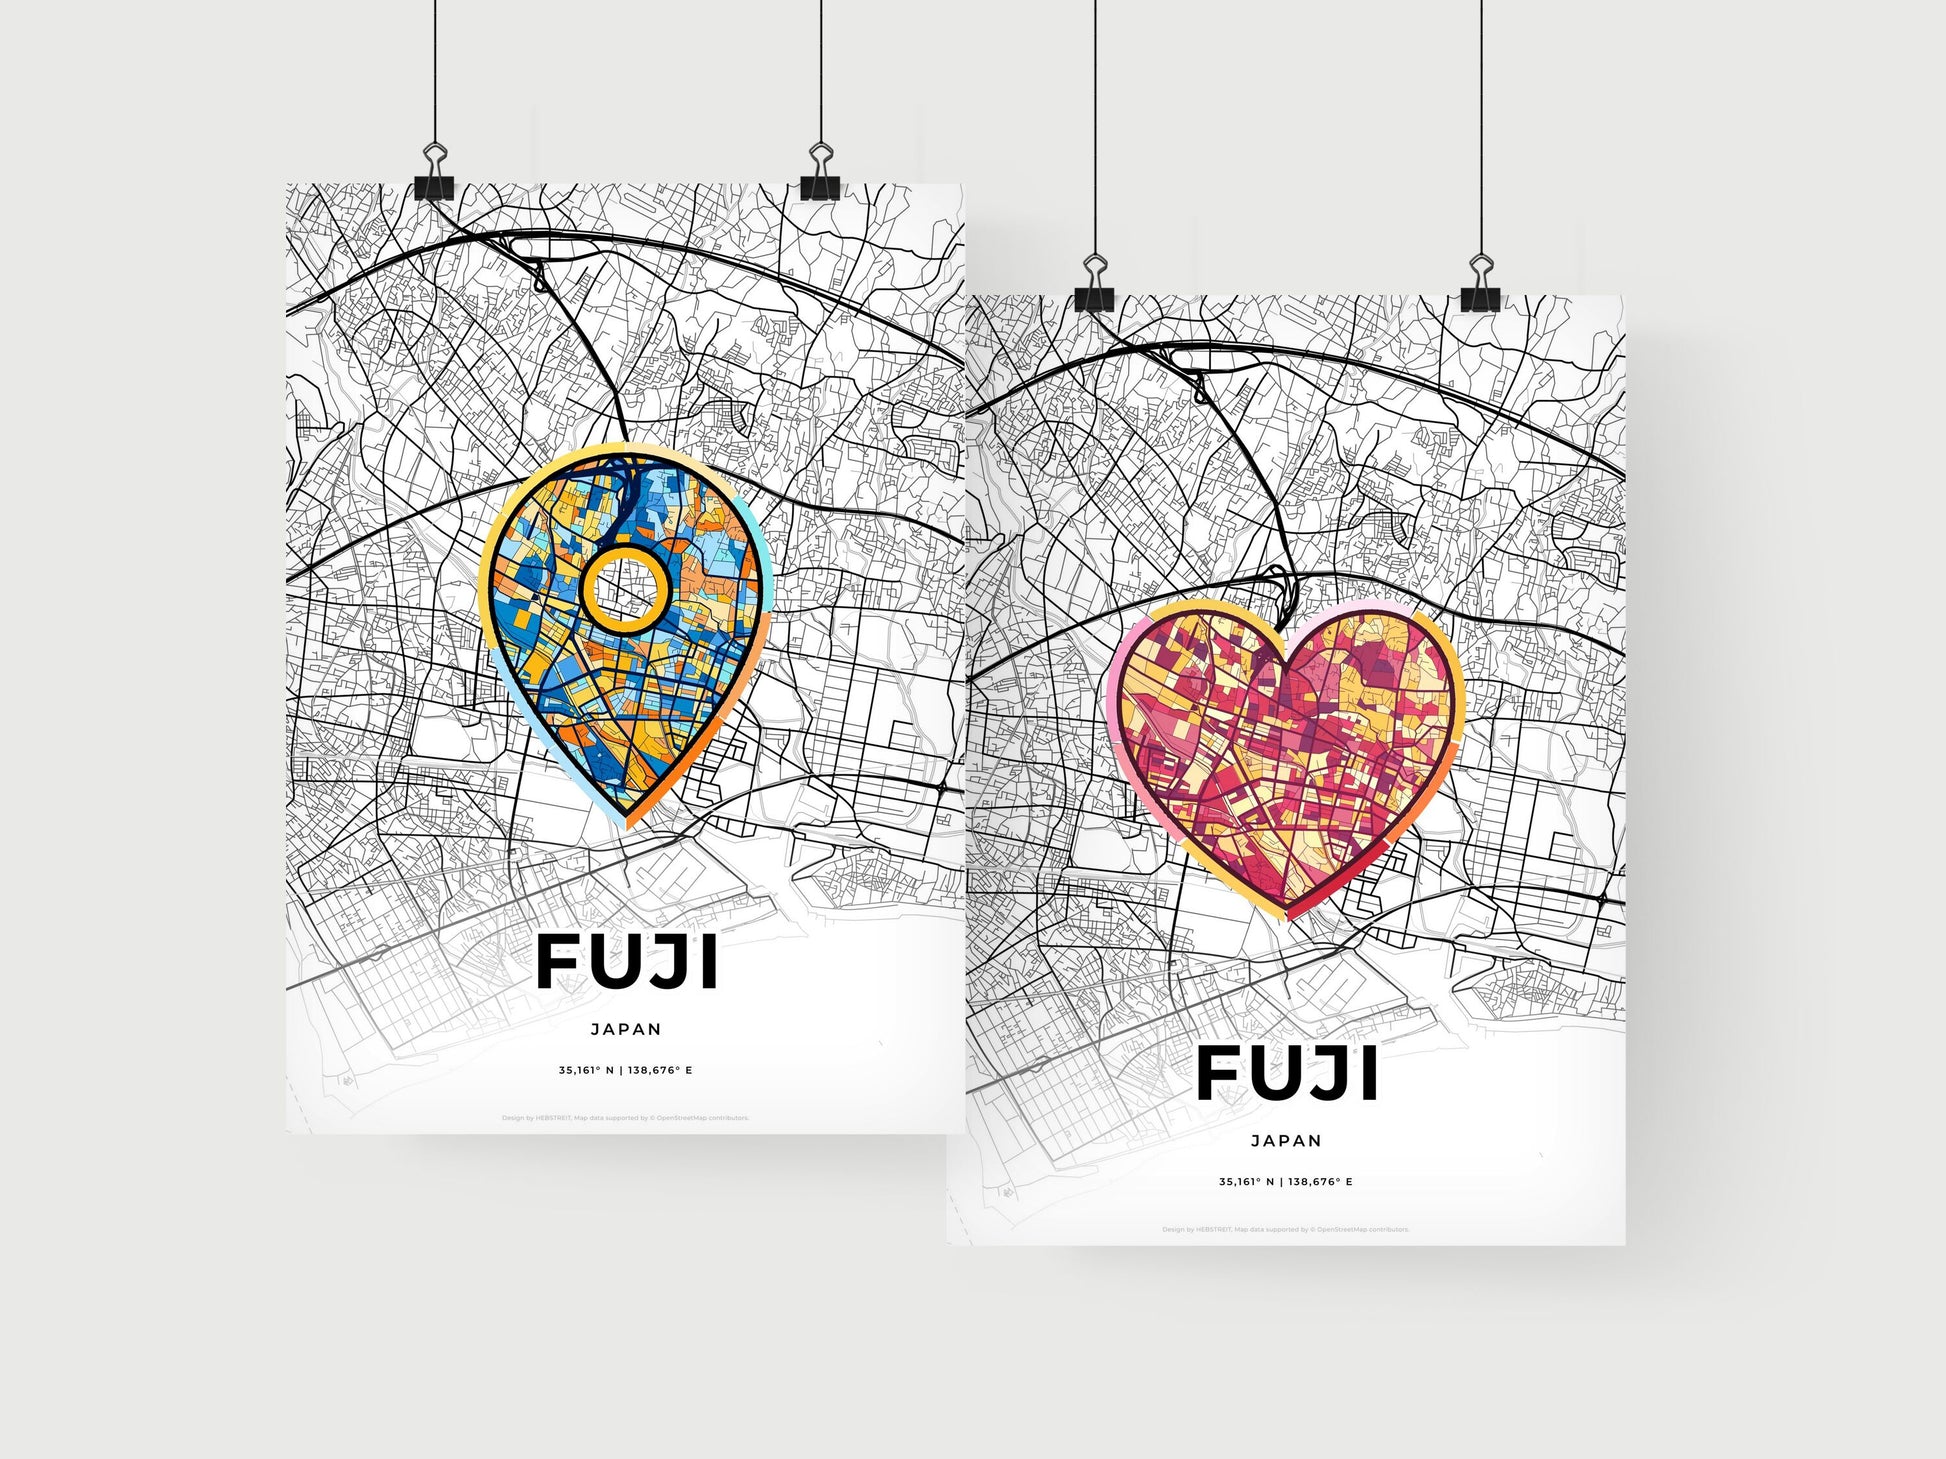 FUJI JAPAN minimal art map with a colorful icon. Where it all began, Couple map gift.